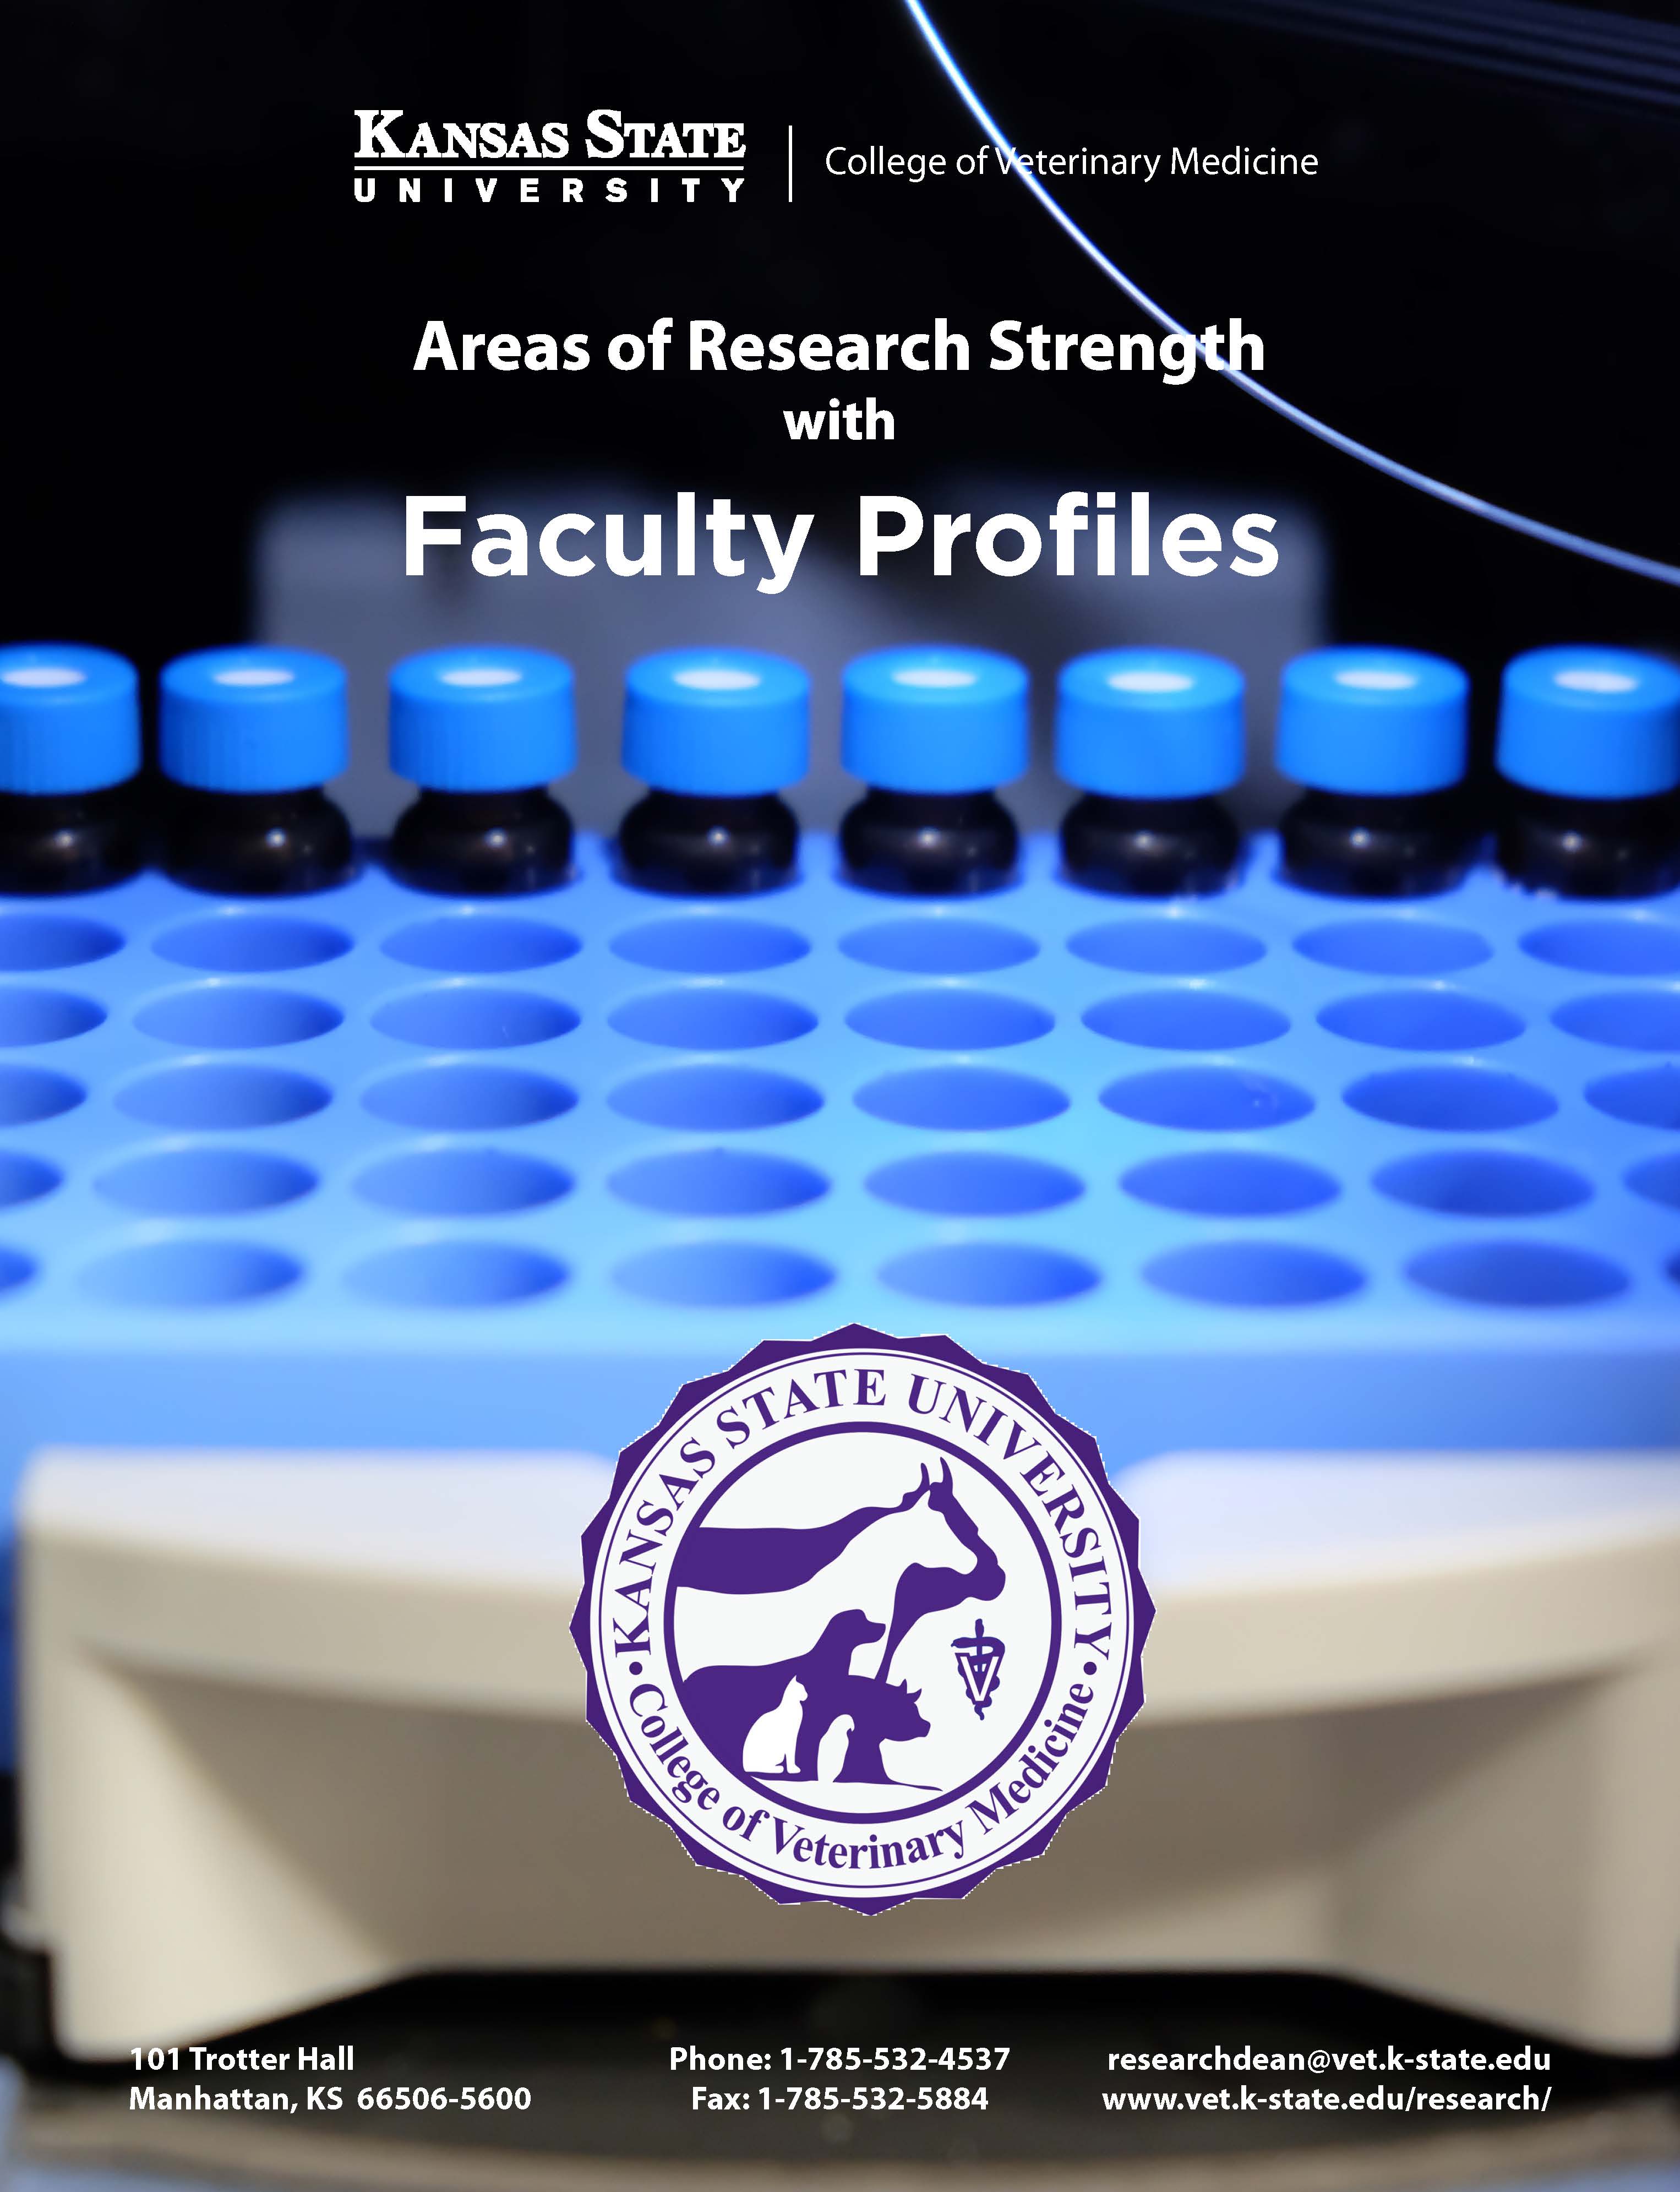 Areas of Research Strength with Faculty Profiles